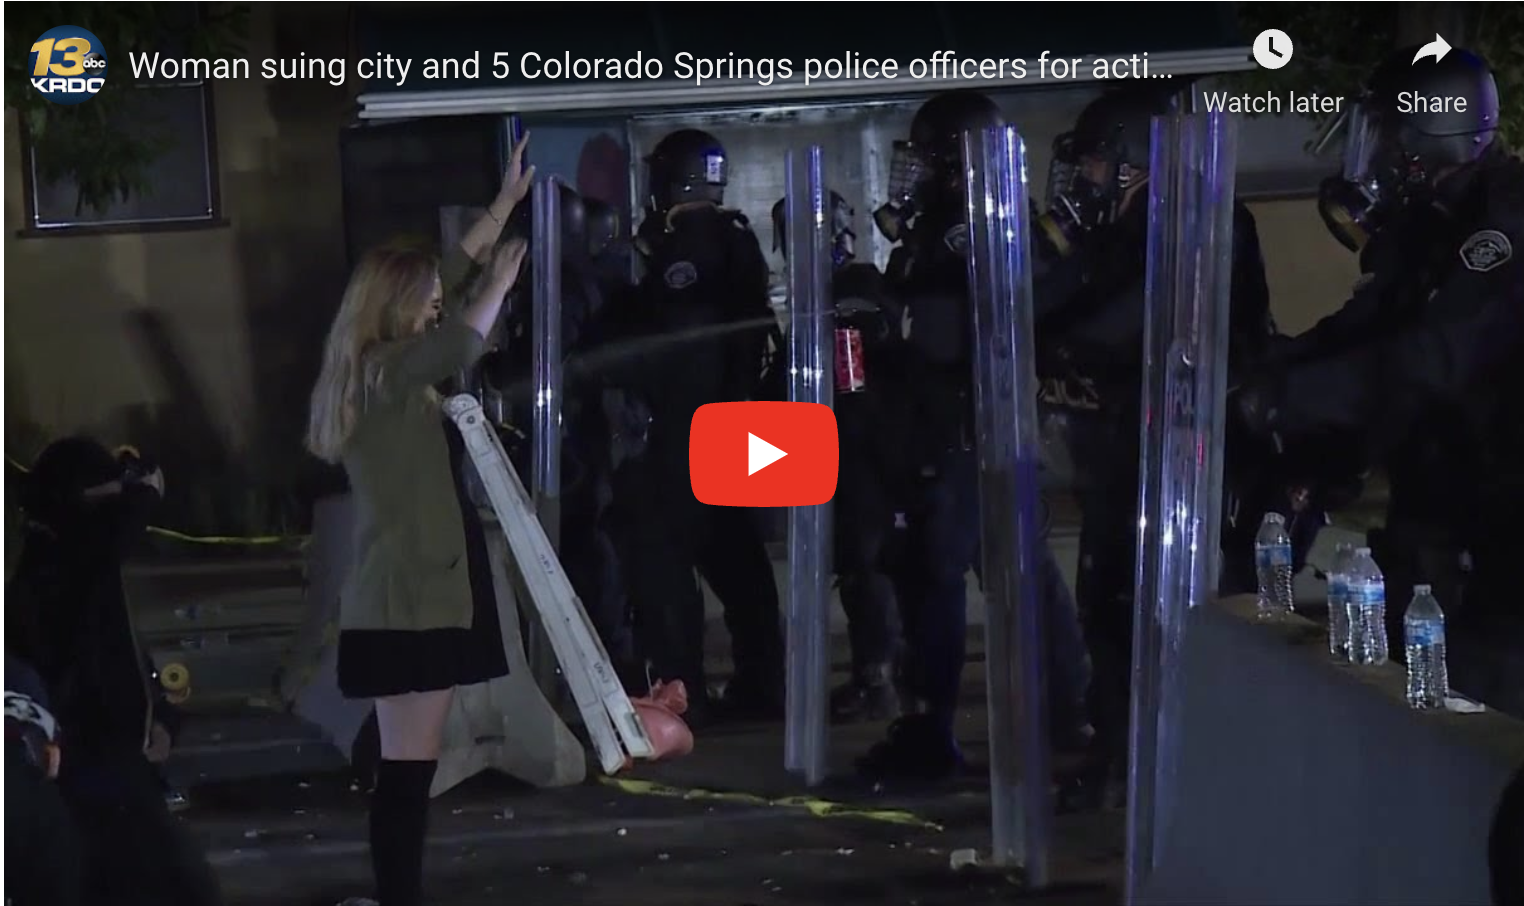 Woman sues five Colorado Springs police officers and city; alleges excessive force during 2020 protest